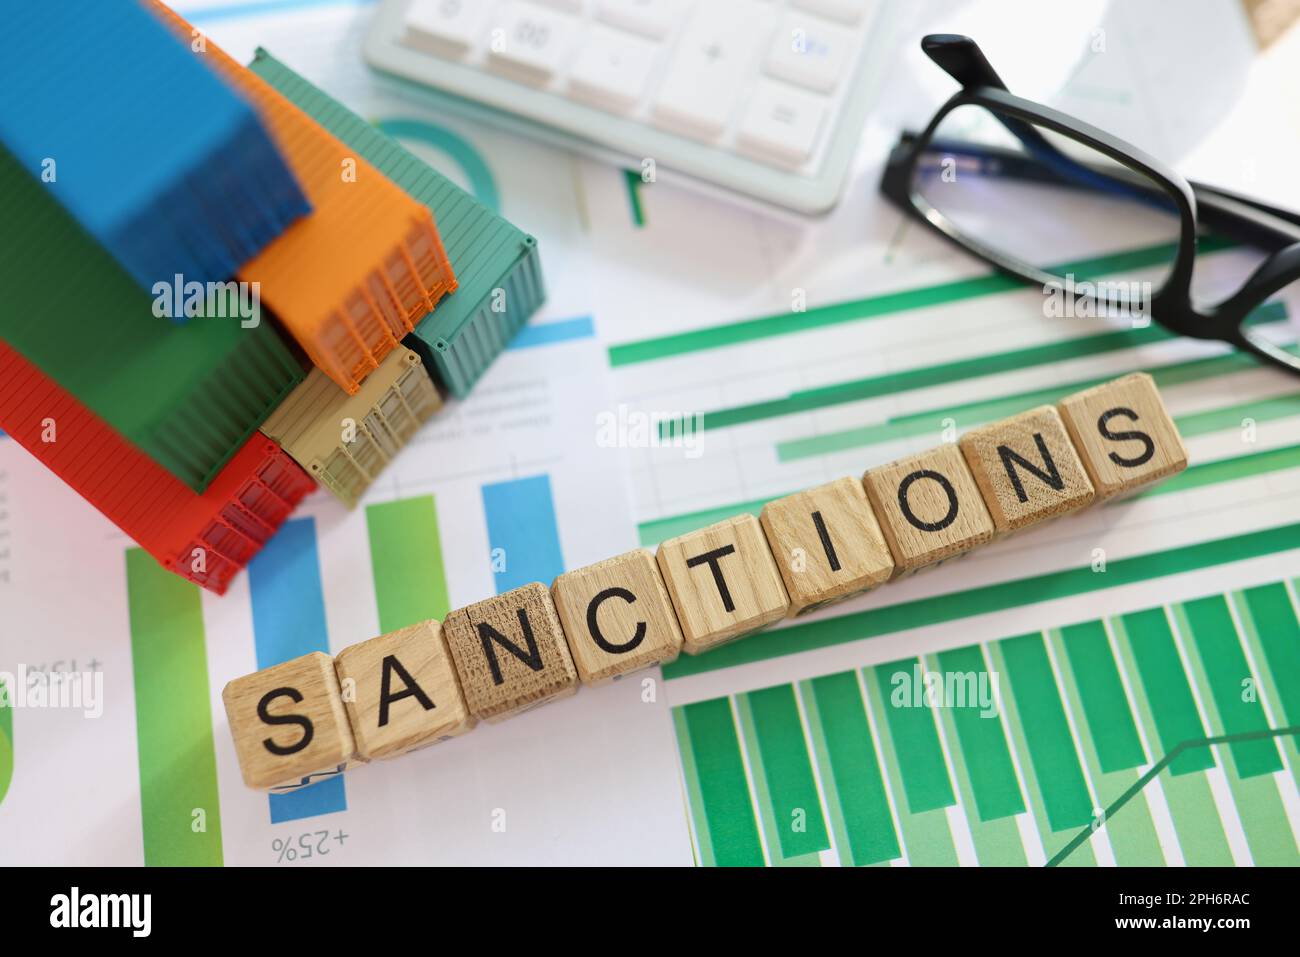 Word Sanctions with wooden blocks on diagrams in office Stock Photo